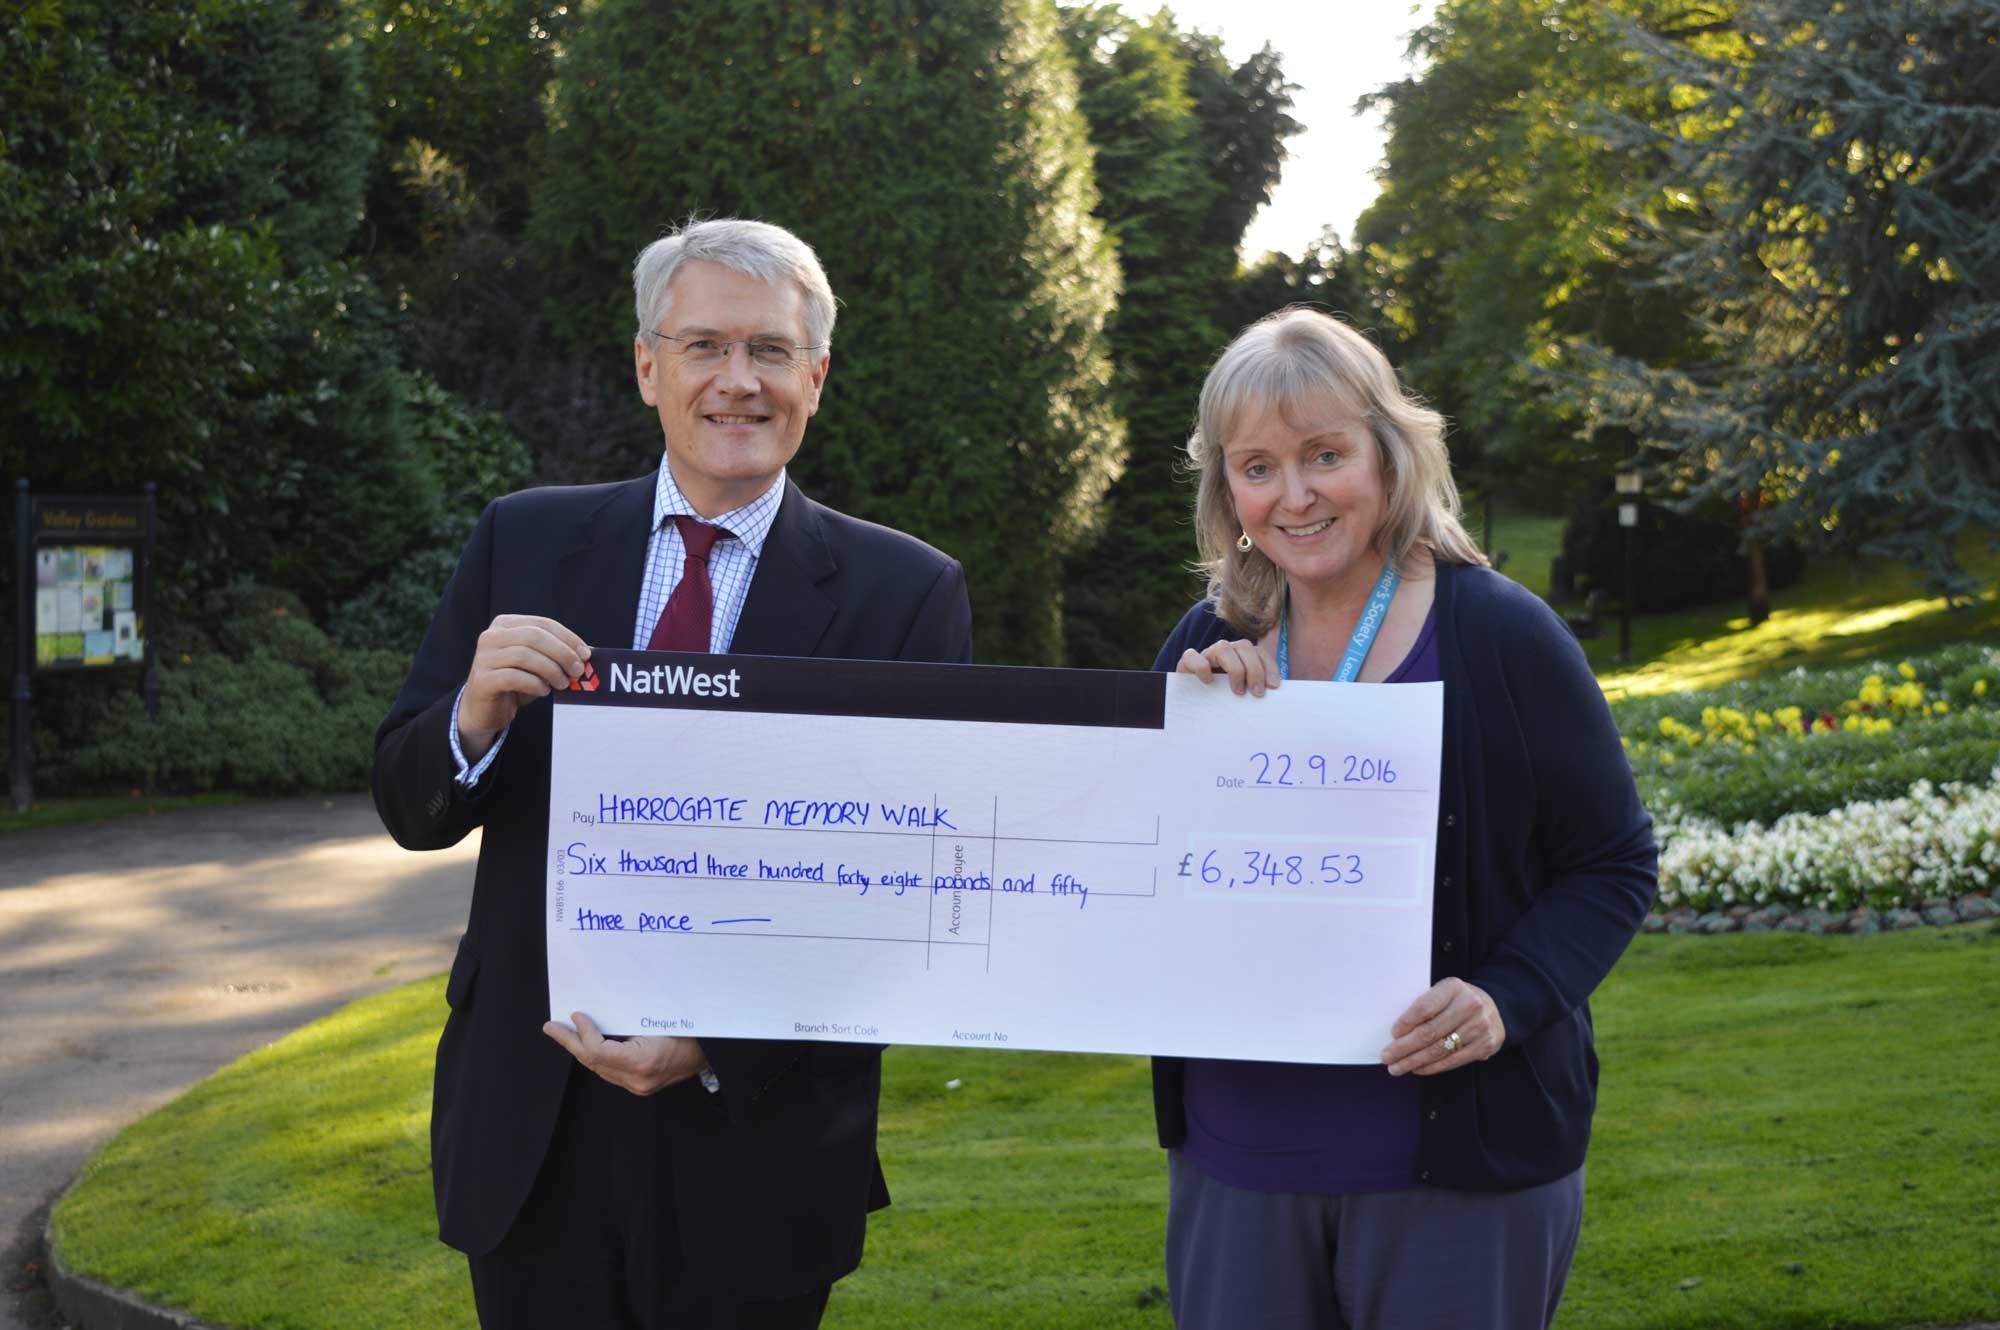 Andrew Jones MP hands a cheque for £6,348.53 to Alzheimer’s Society Services Manager, Alison Wrigglesworth at the entrance to the Valley Gardens where the walk took place